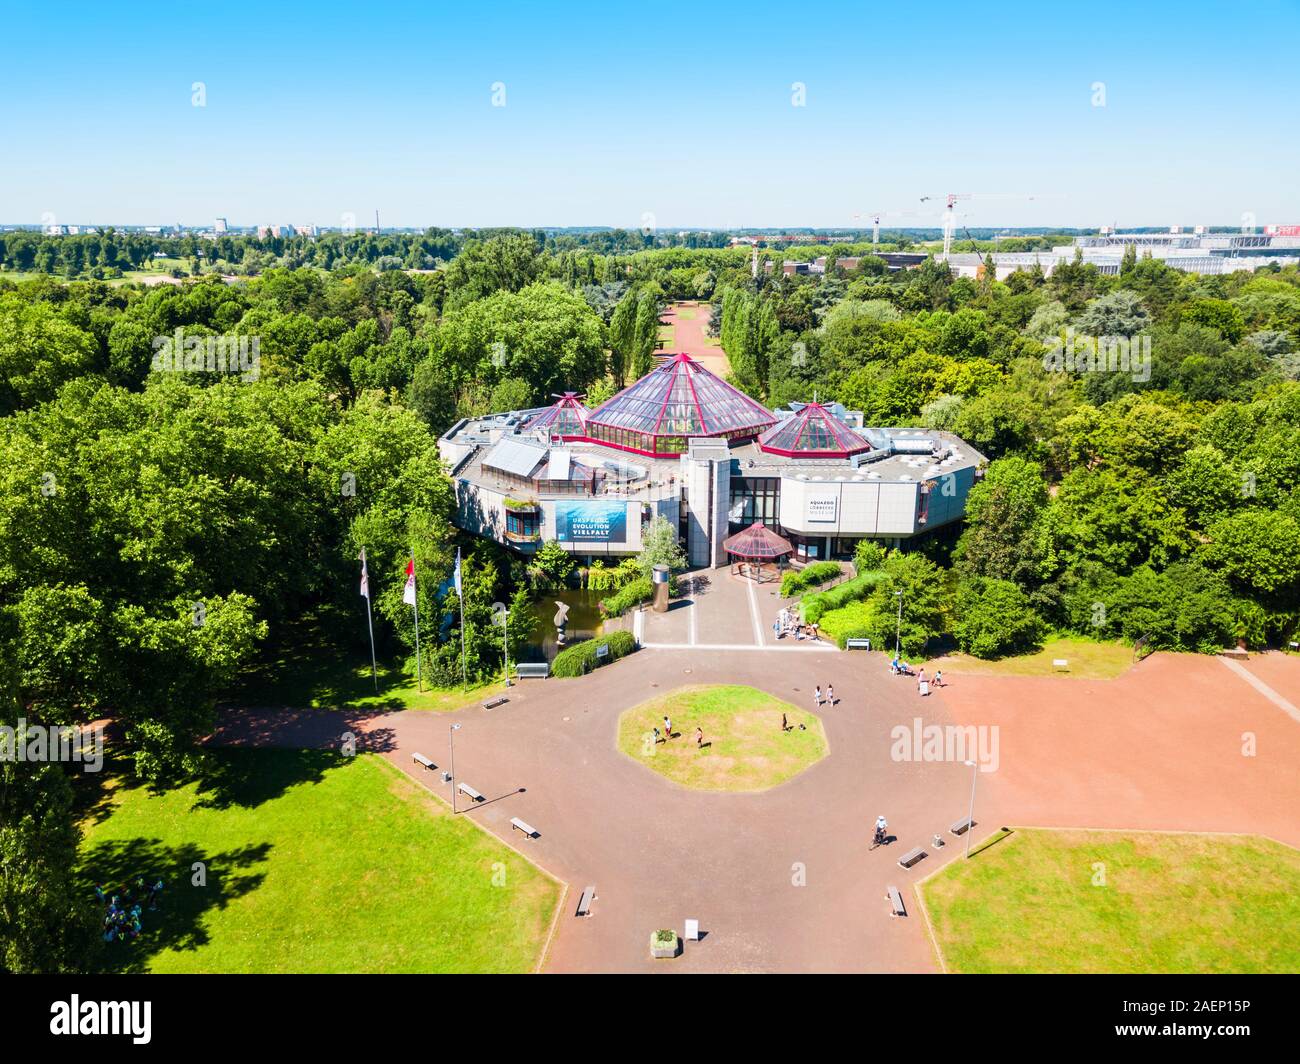 DUSSELDORF, GERMANY - JULY 02, 2018: Aquazoo Lobbecke Museum is a aquarium and museum located in Nordpark in Dusseldorf city in Germany Stock Photo